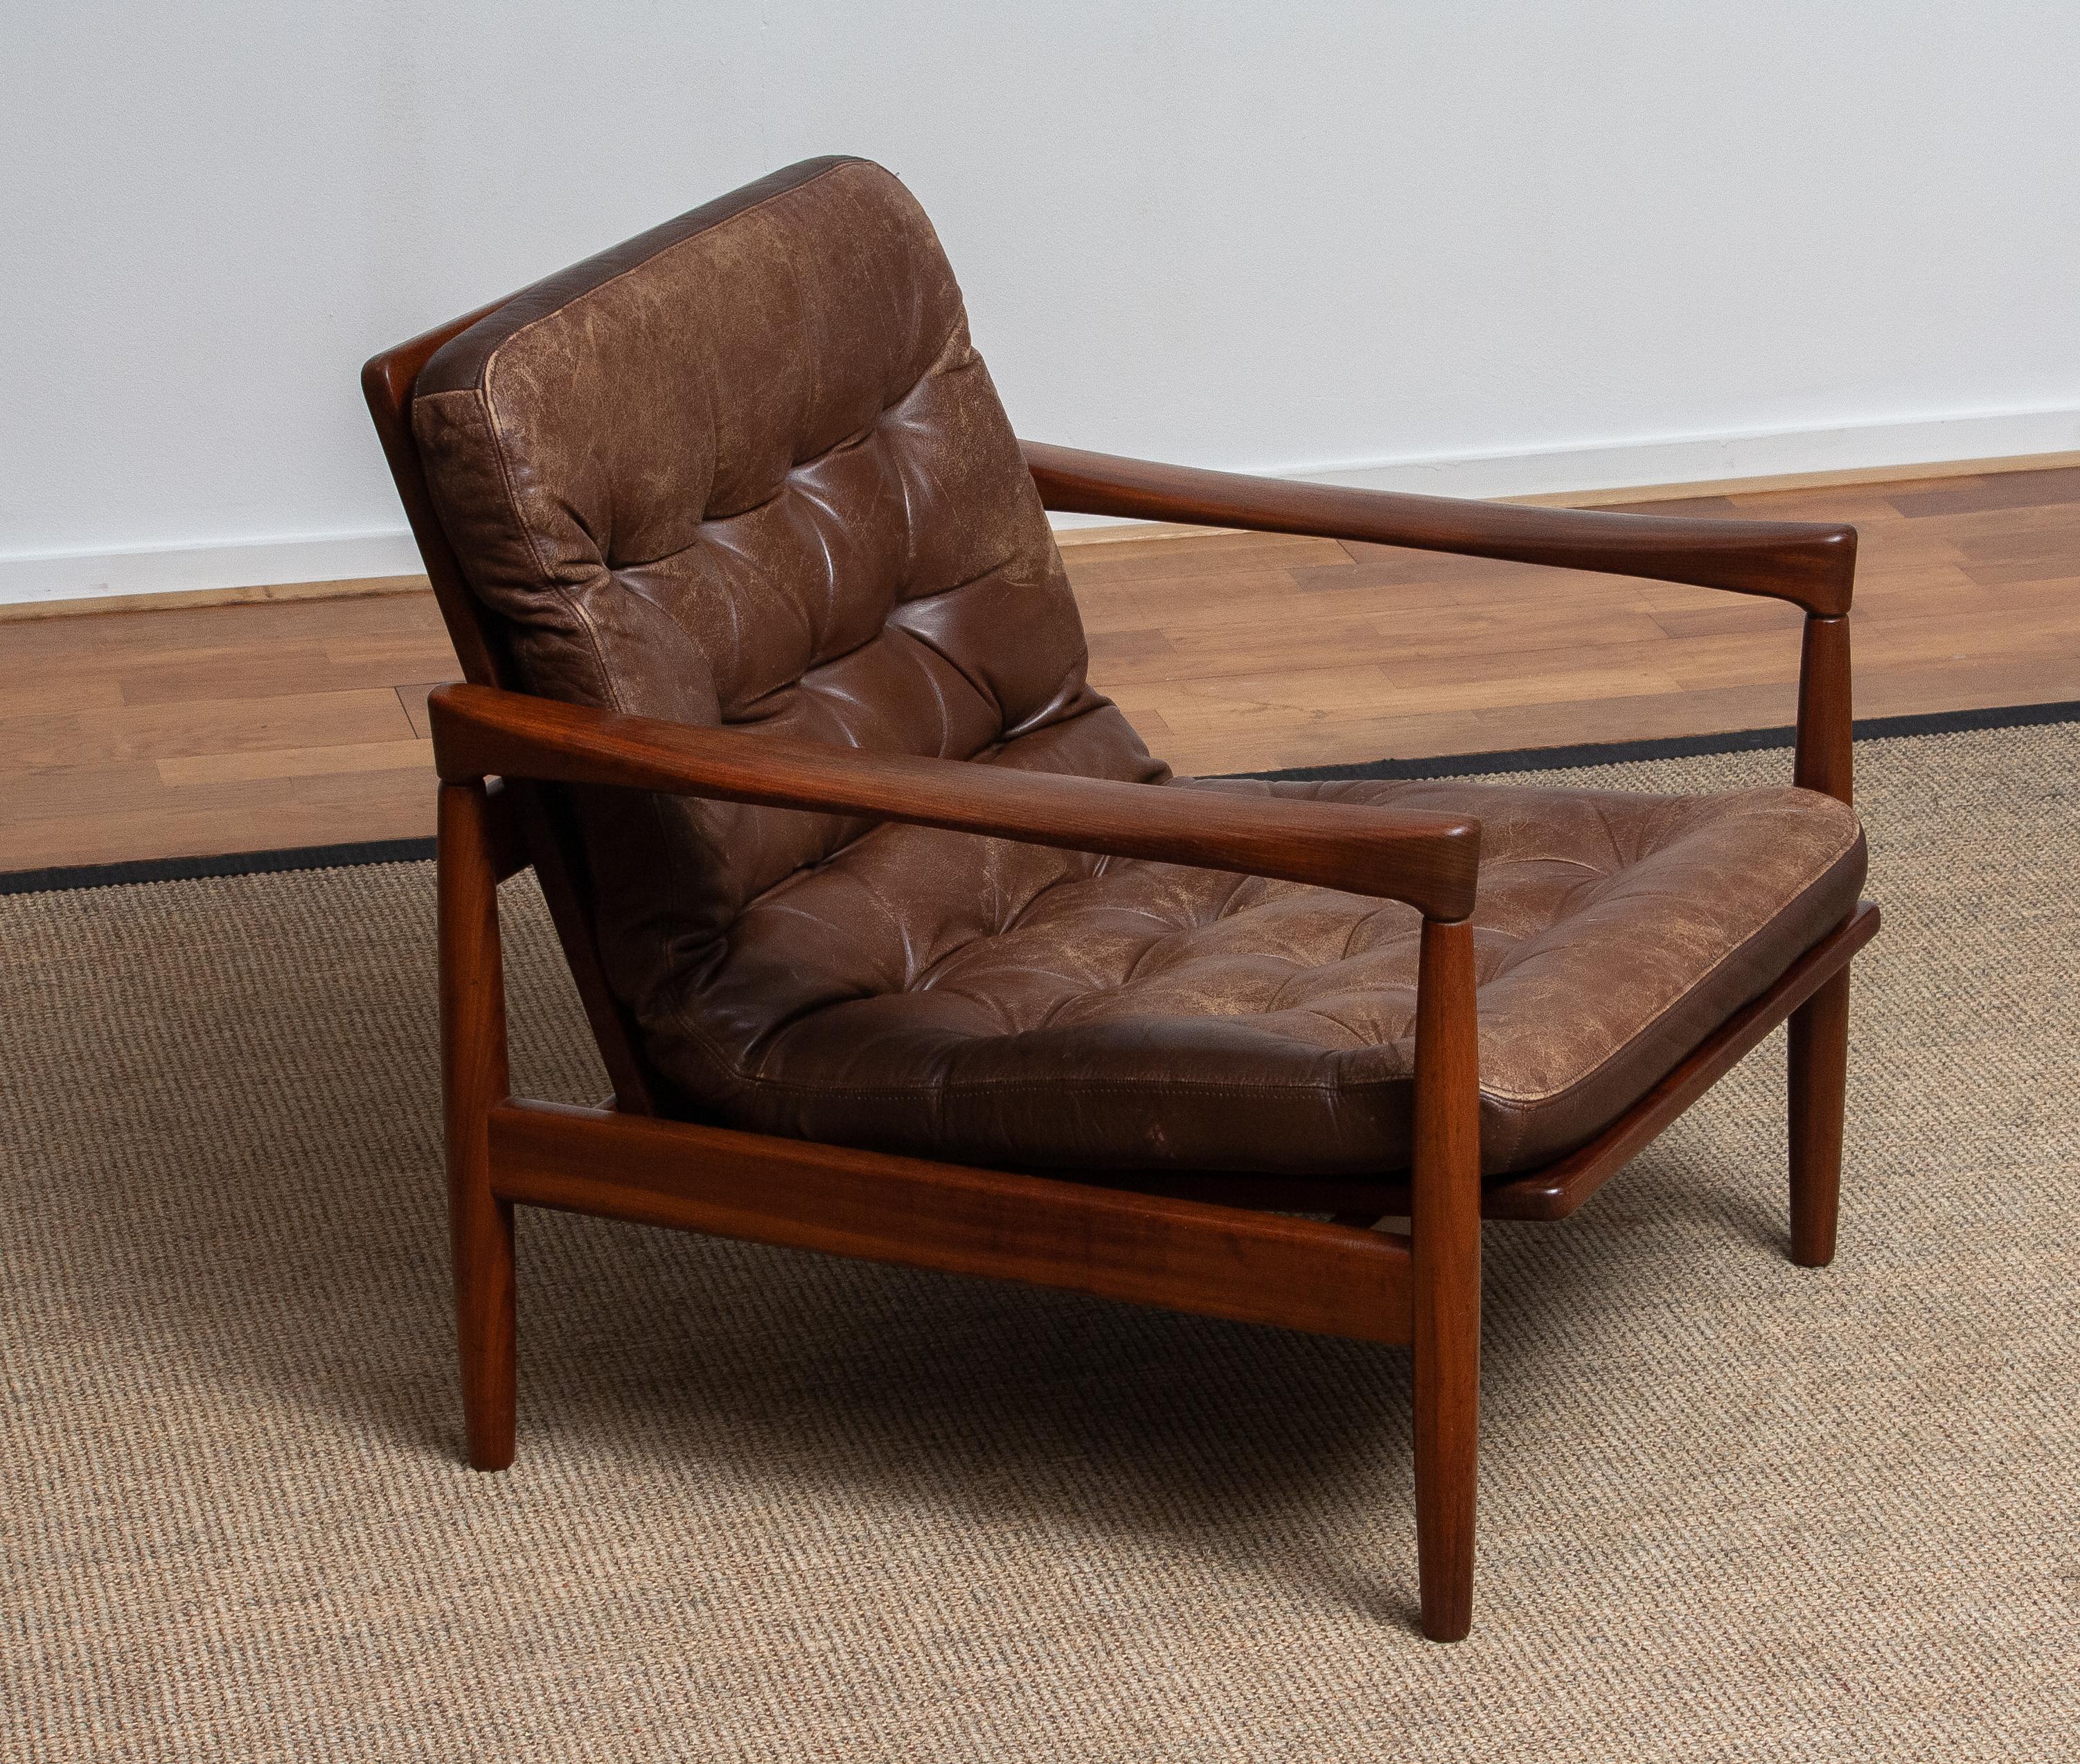 1960s, Teak and Brown Leather Lounge Chair by Erik Wörtz for Bröderna Anderssons 6